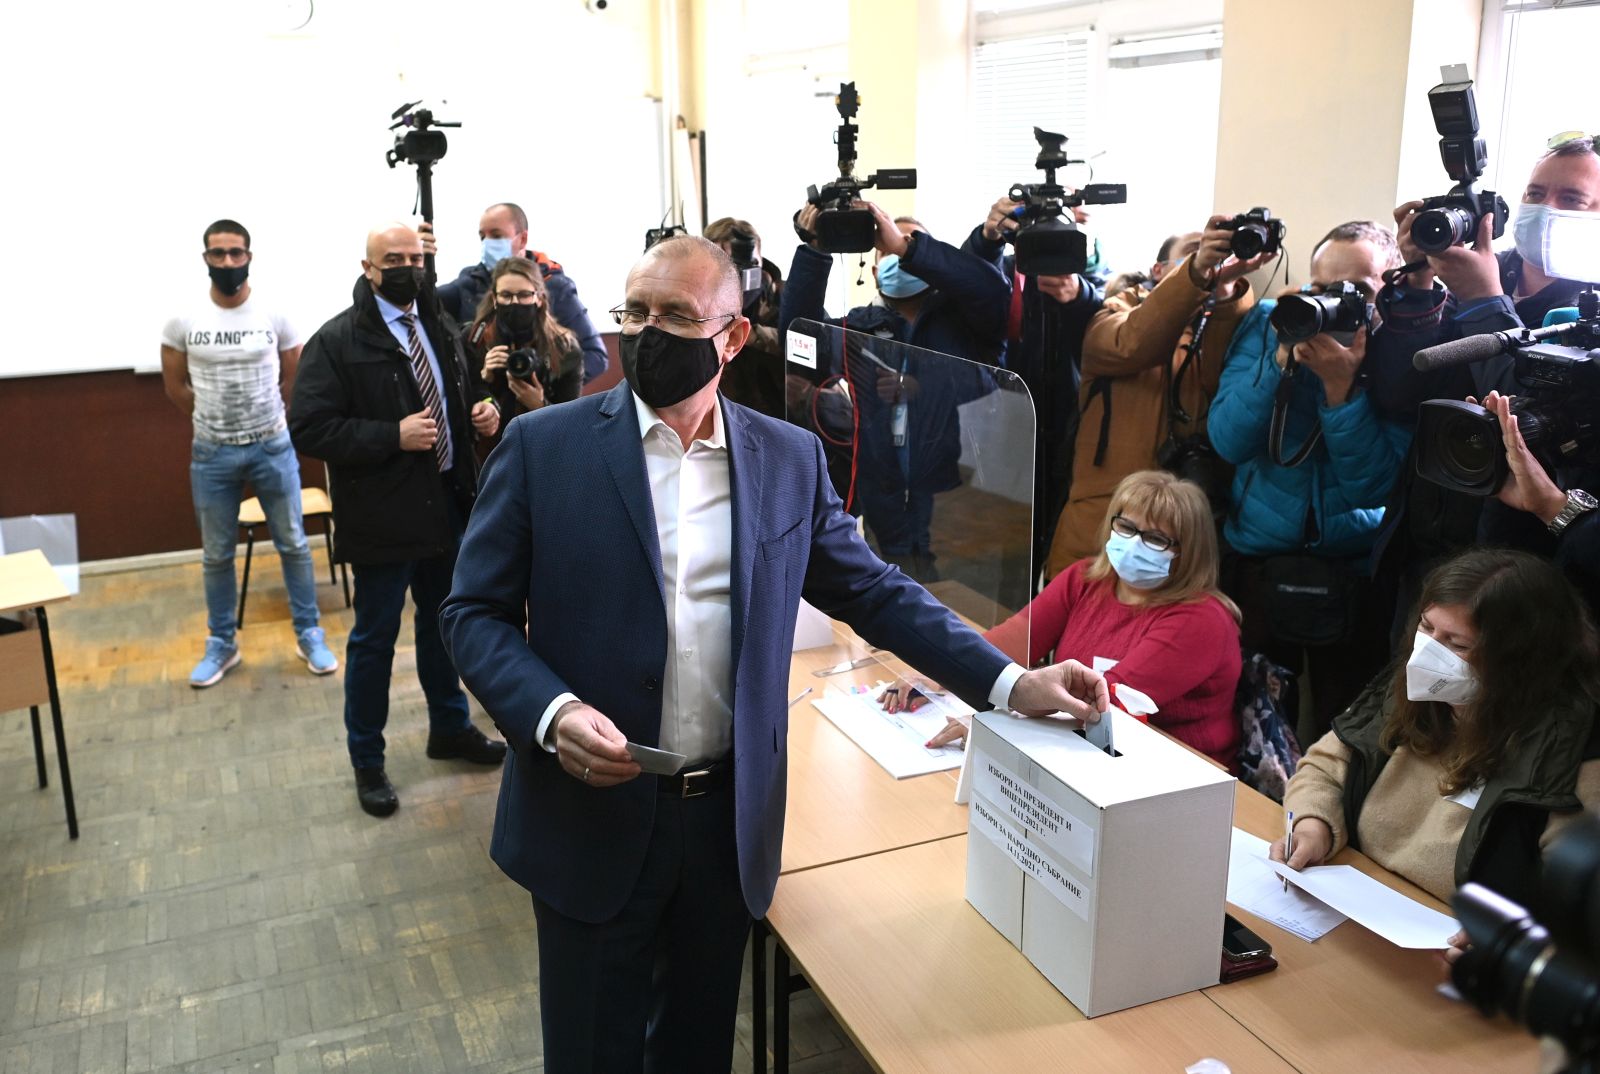 epa09581187 Bulgarian President Rumen Radev casts his ballot at a polling station during the general elections in Sofia, Bulgaria on 14 November 2021. Bulgarians are voting to elect a new parliament and a new president, amid a new wave of coronavirus, for the third time in 2021, hoping to end political deadlock  EPA/VASSIL DONEV